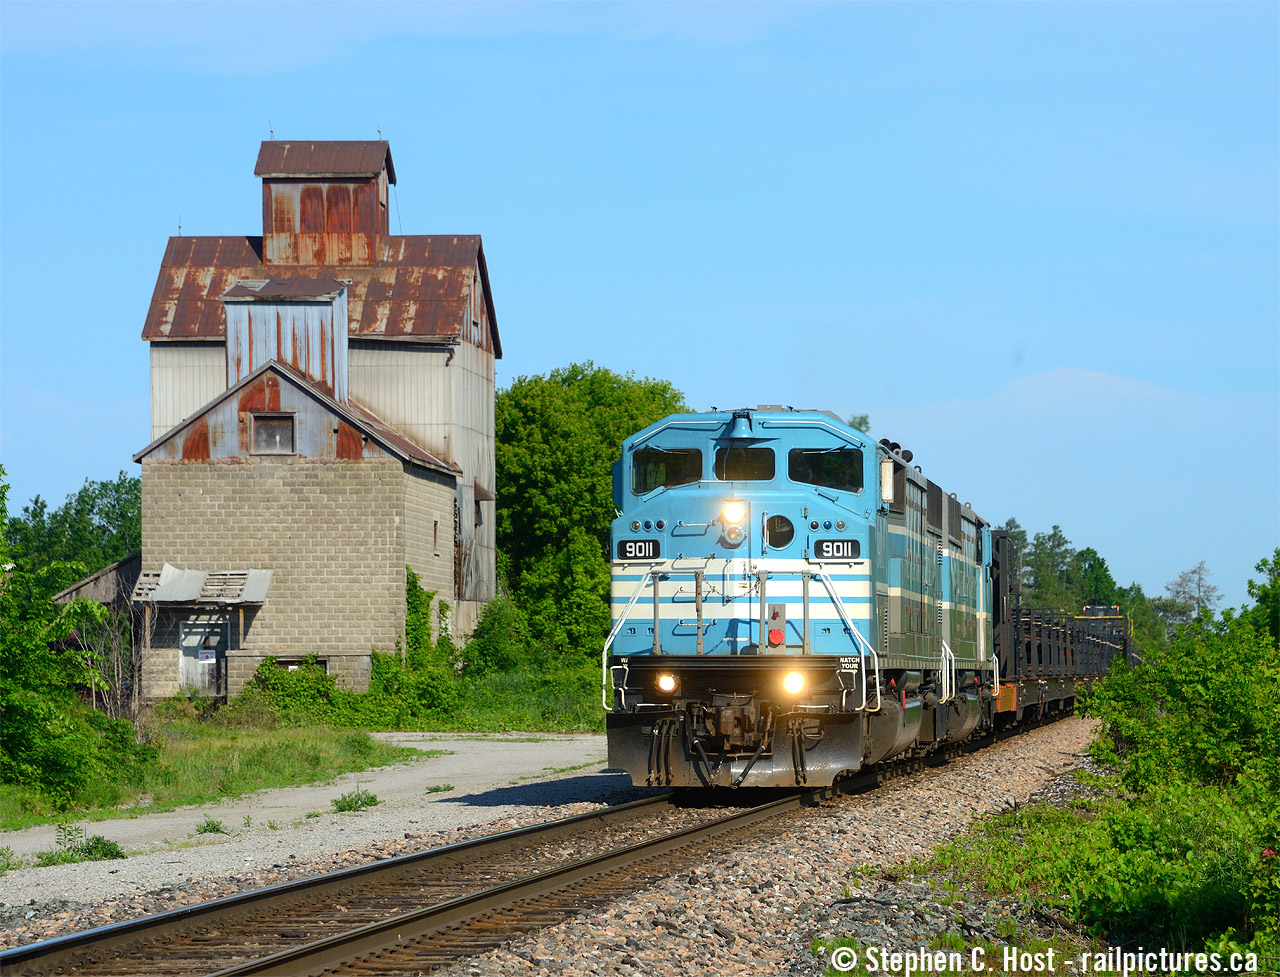 It's hard to believe this scene is so close to Toronto, but it is, and at what would have been Kleinburg Ontario is some old grain elevator (not the prettiest looking one, mind you) still standing in defiance to Toronto land prices. Here is a rail train heading south after parking overnight in Palgrave in nice morning light. Also, as it would turn out, some of these are now in Mayfield KY getting rebuilt and repainted by Progress Rail back into  CP beaver.